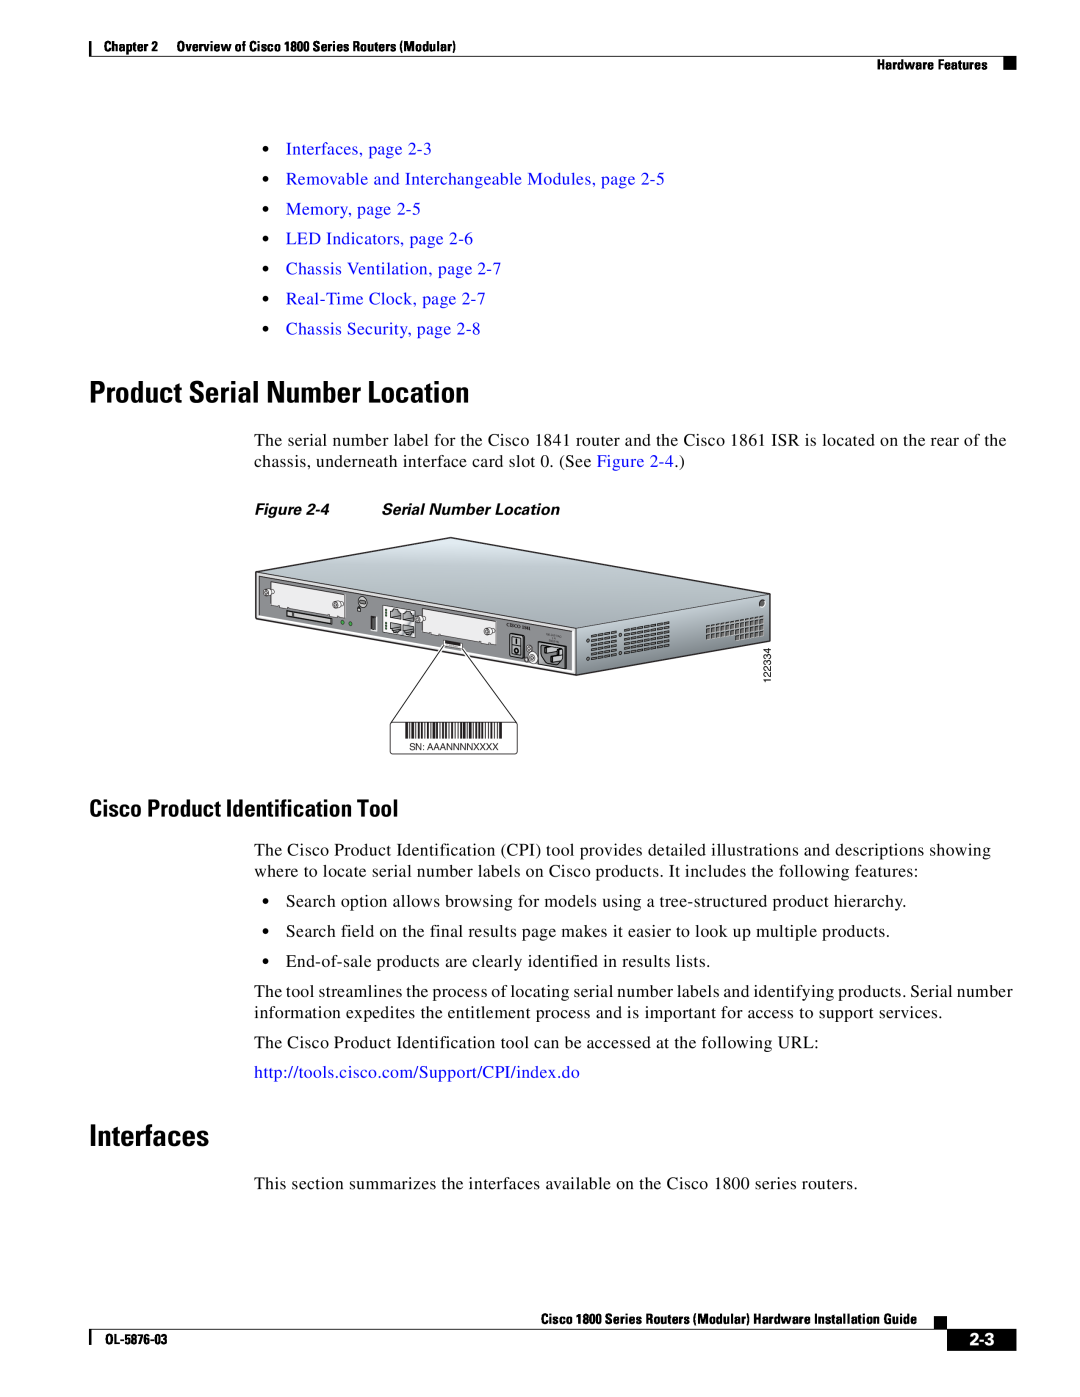 Cisco Systems CISCO1841-HSEC/K9-RF manual Product Serial Number Location, Interfaces, Cisco Product Identification Tool 